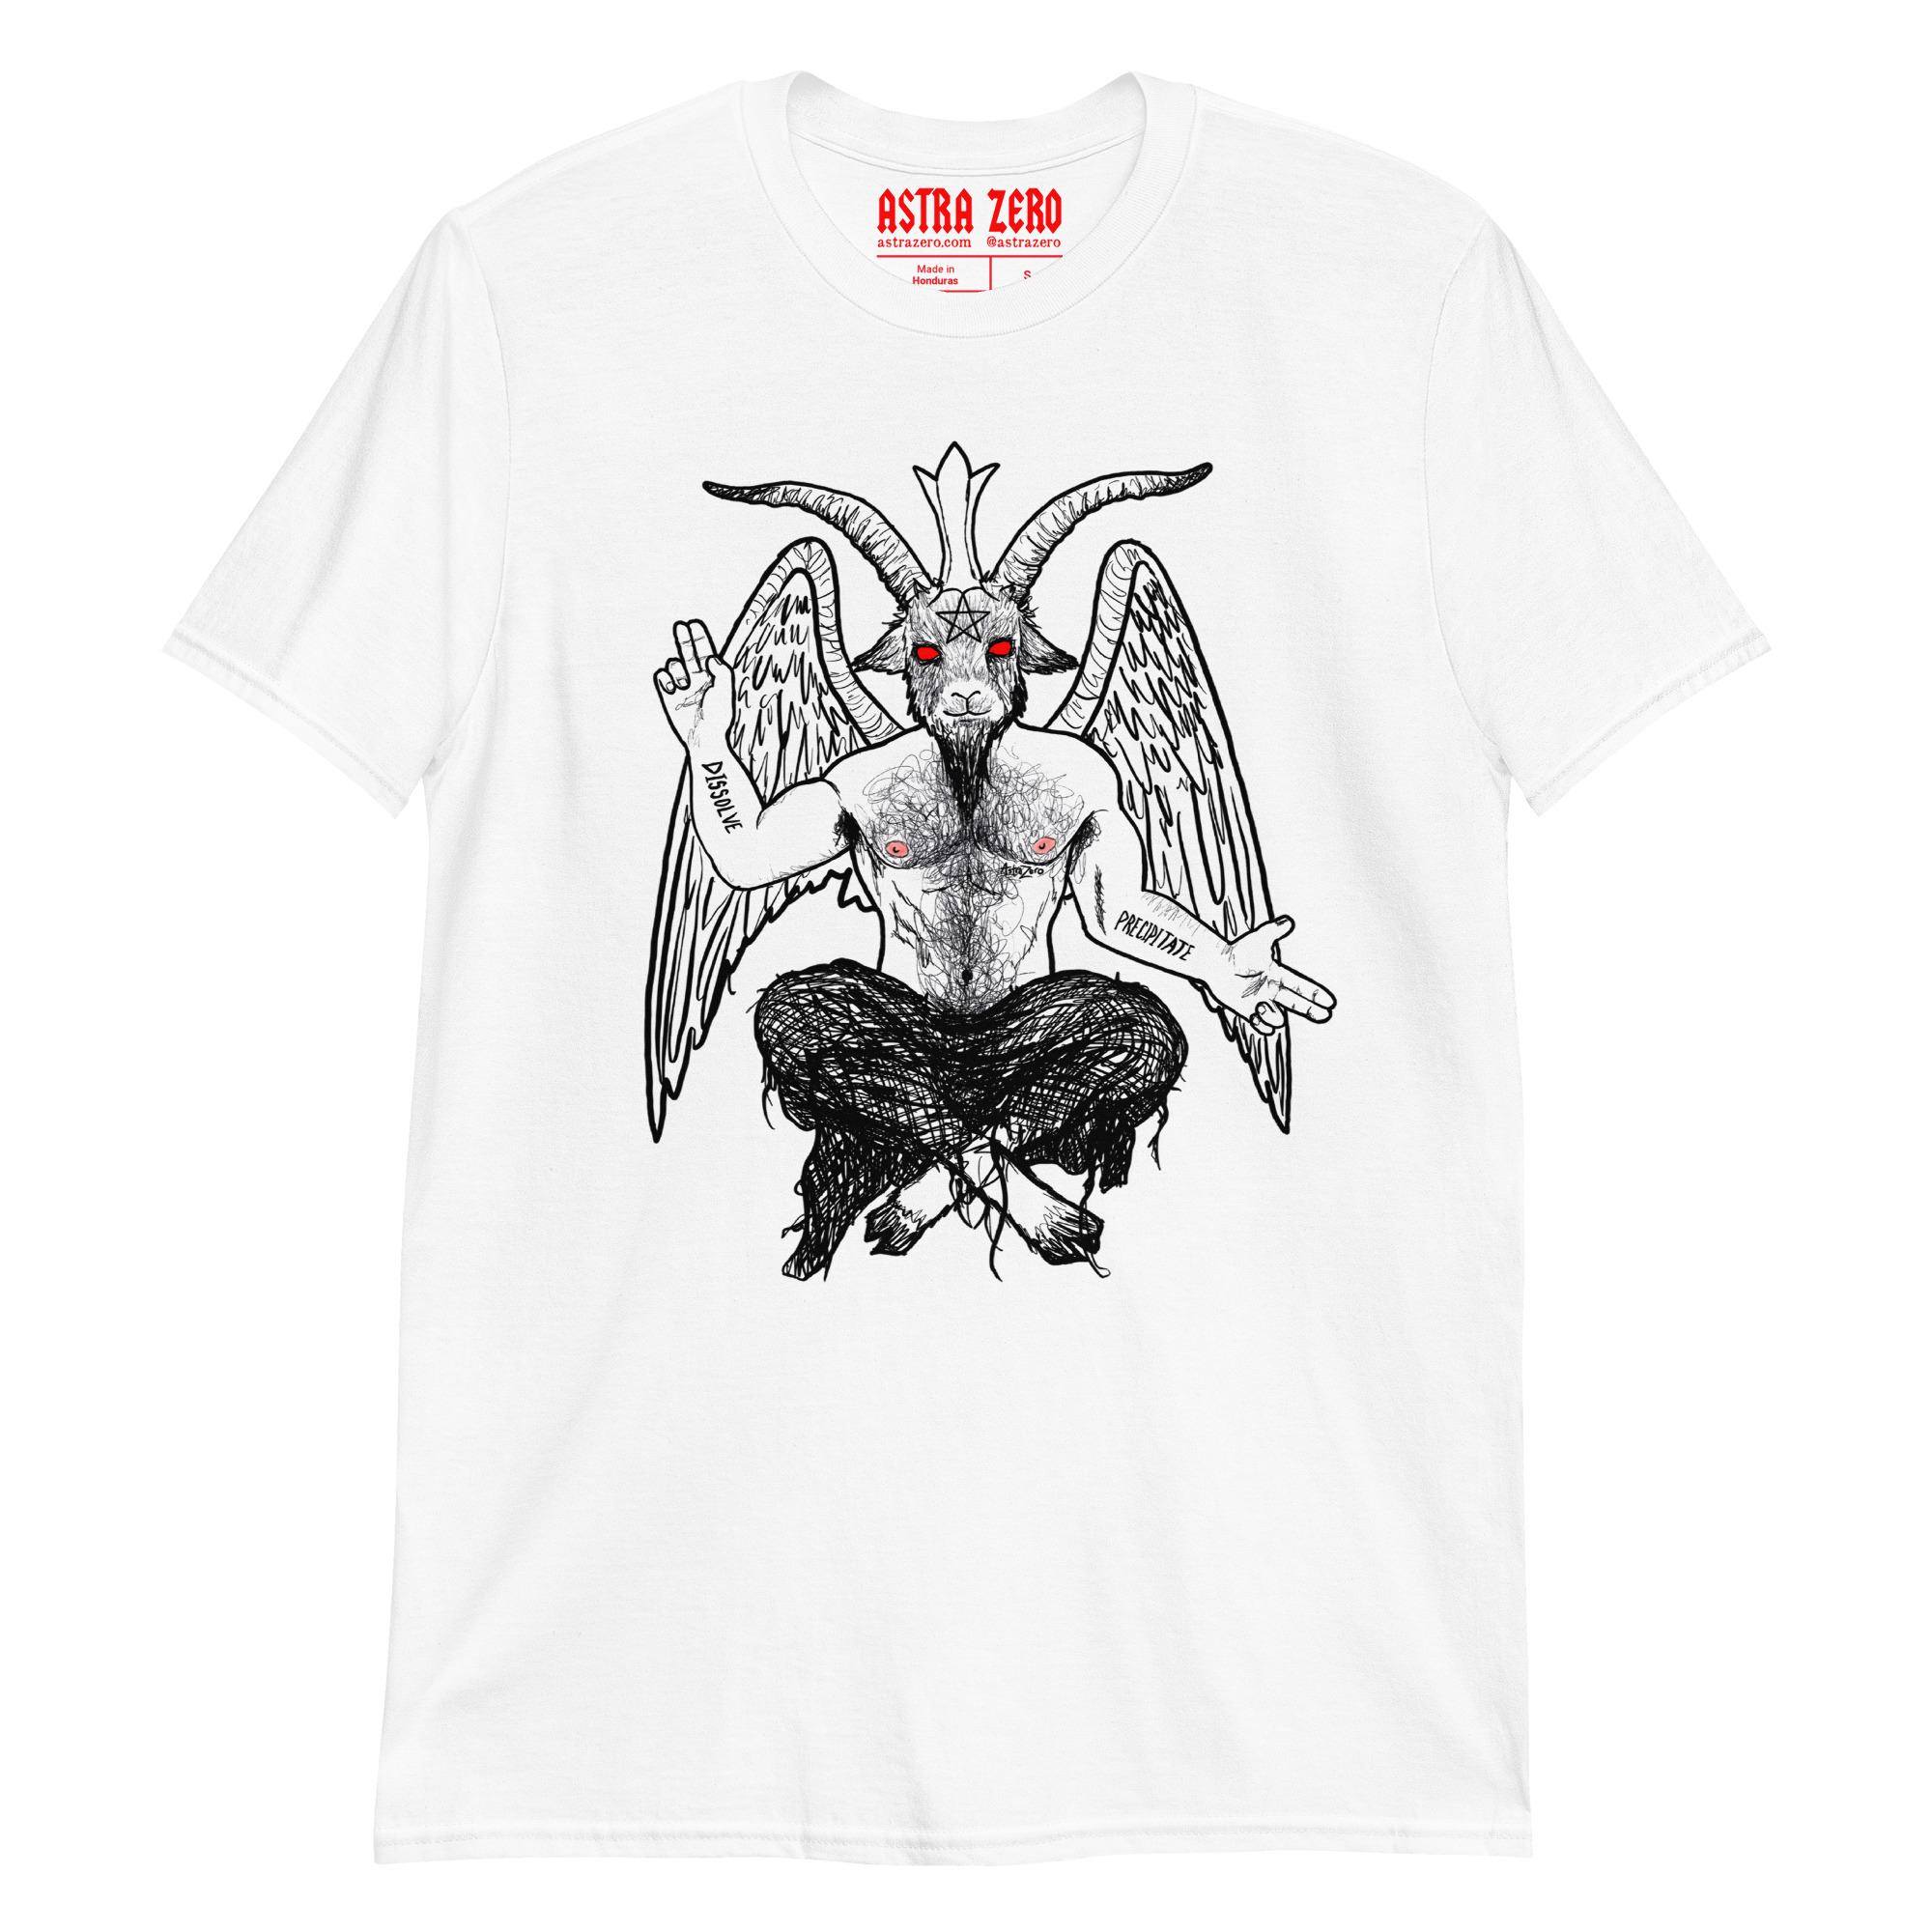 Featured image for “Baphomet Beef - Short-Sleeve Unisex T-Shirt”